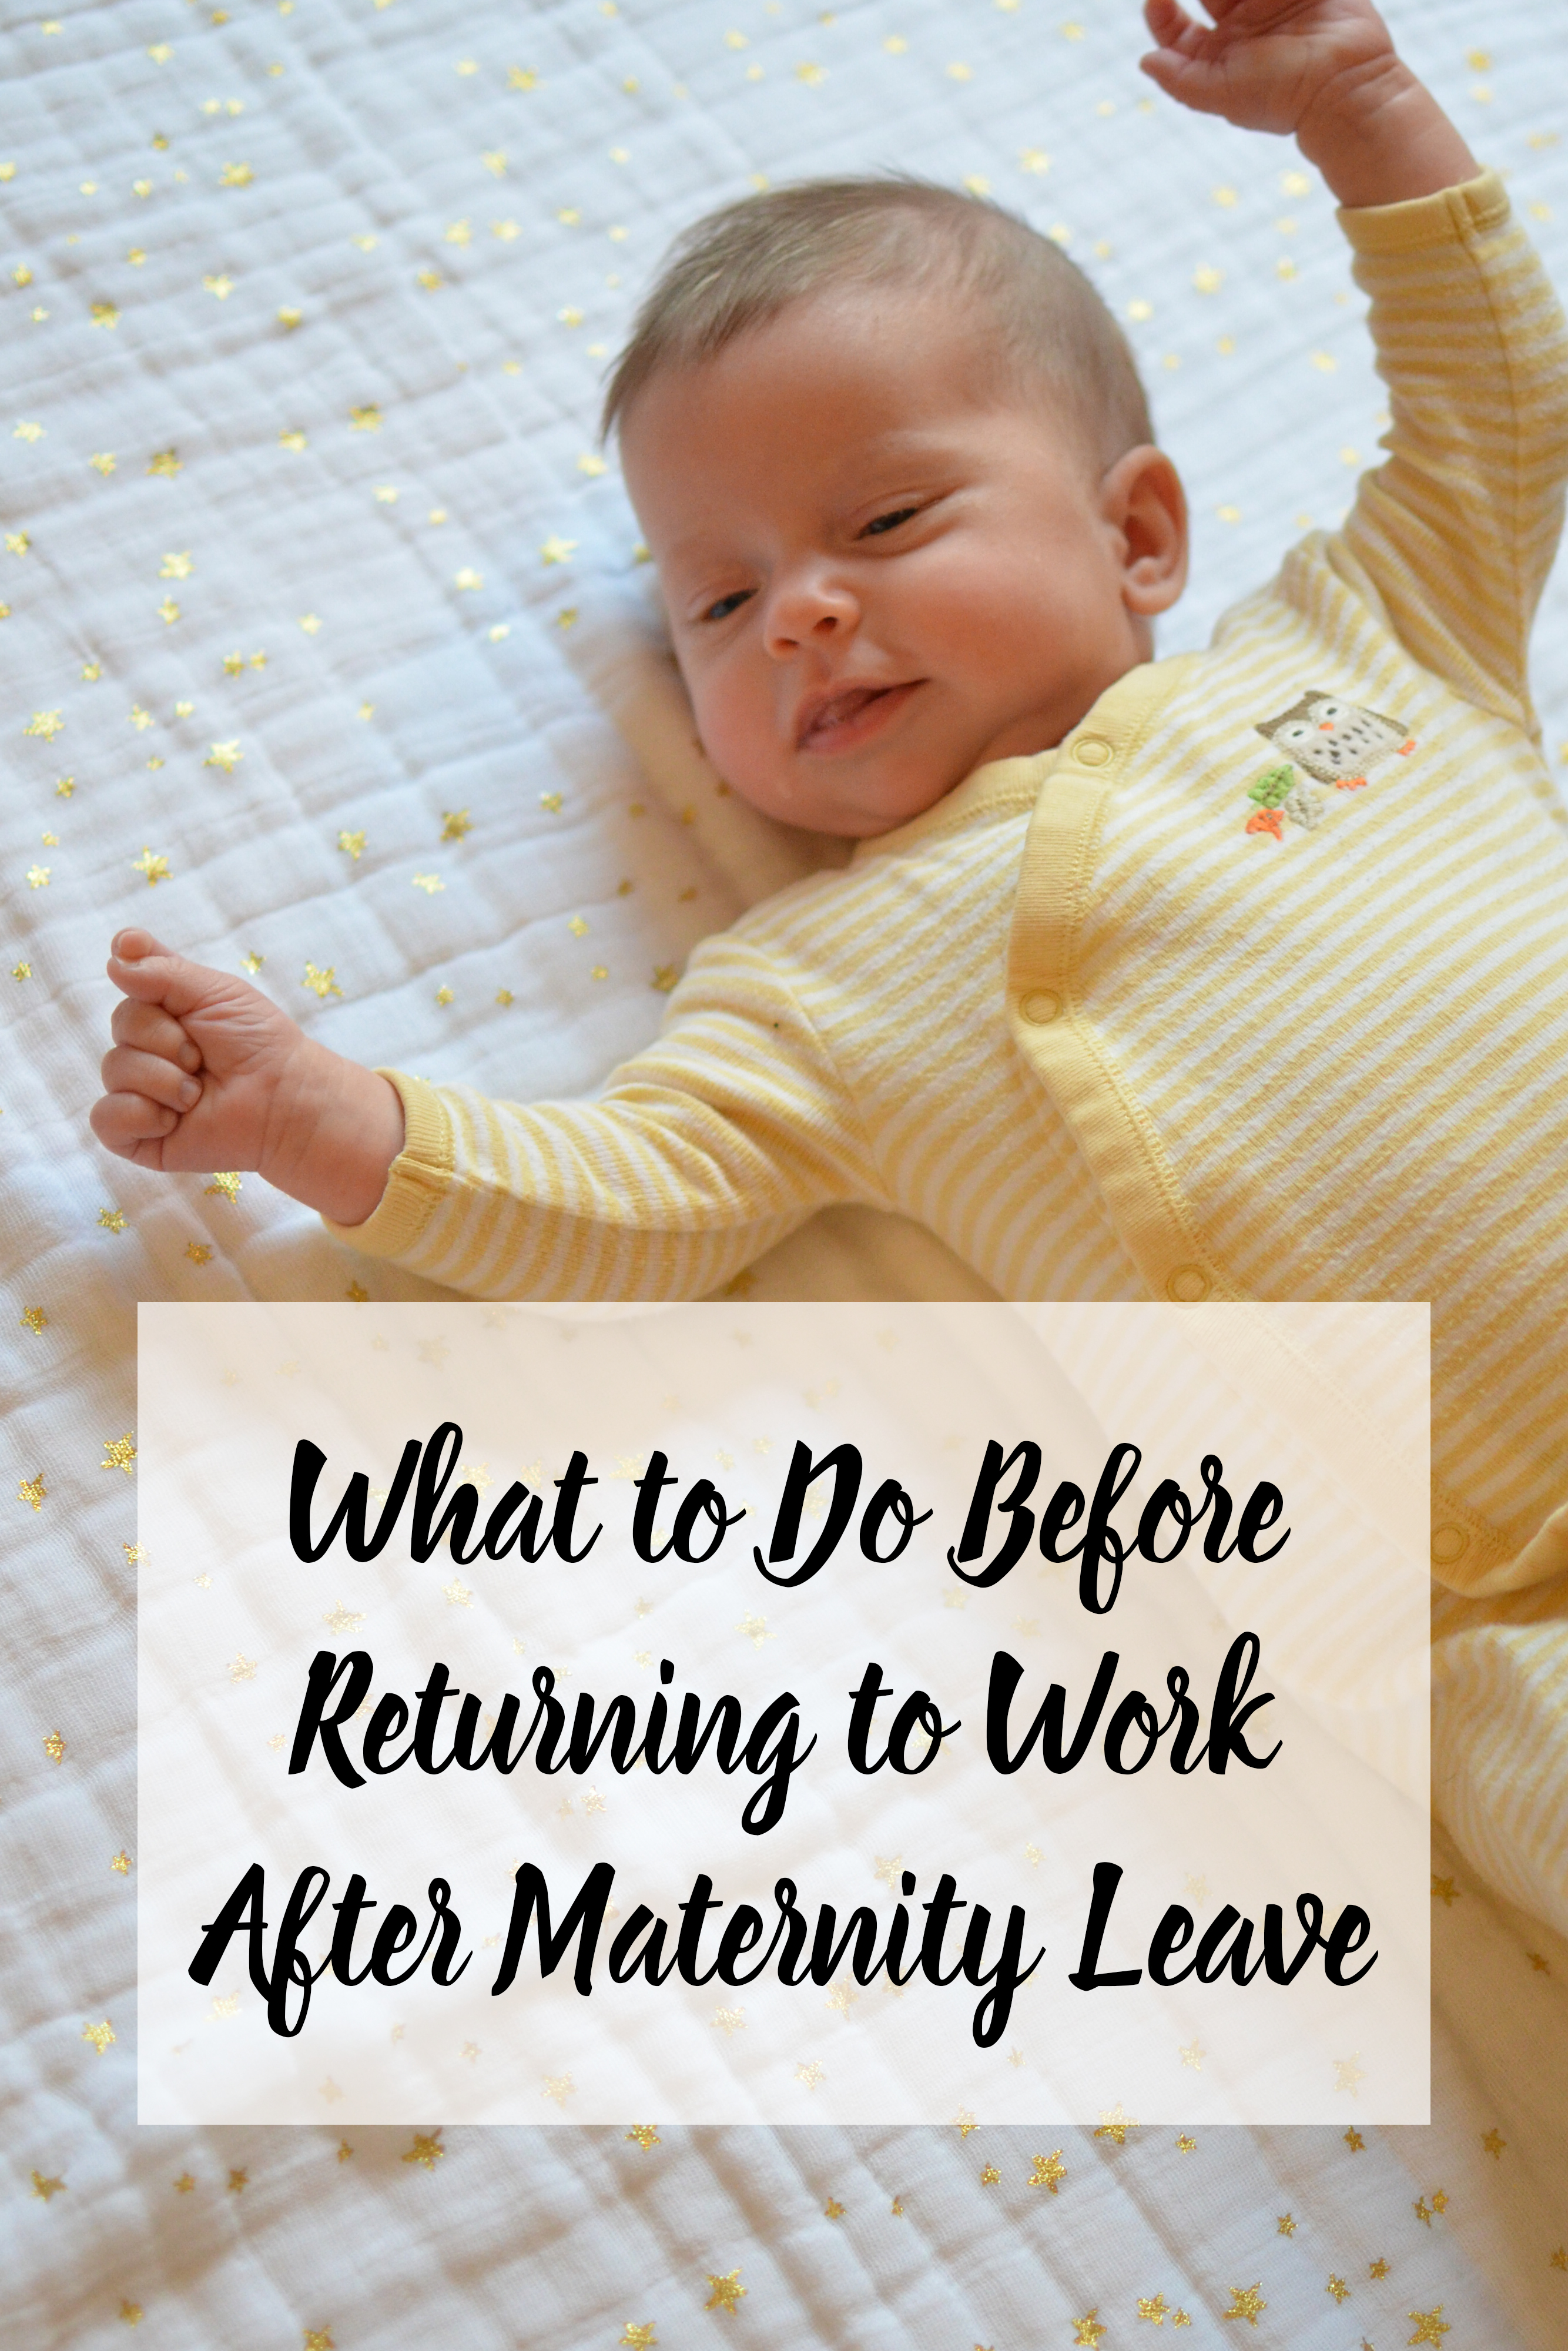 Heading back to work? Here are 10 tips to prepare to go back to work after maternity leave!